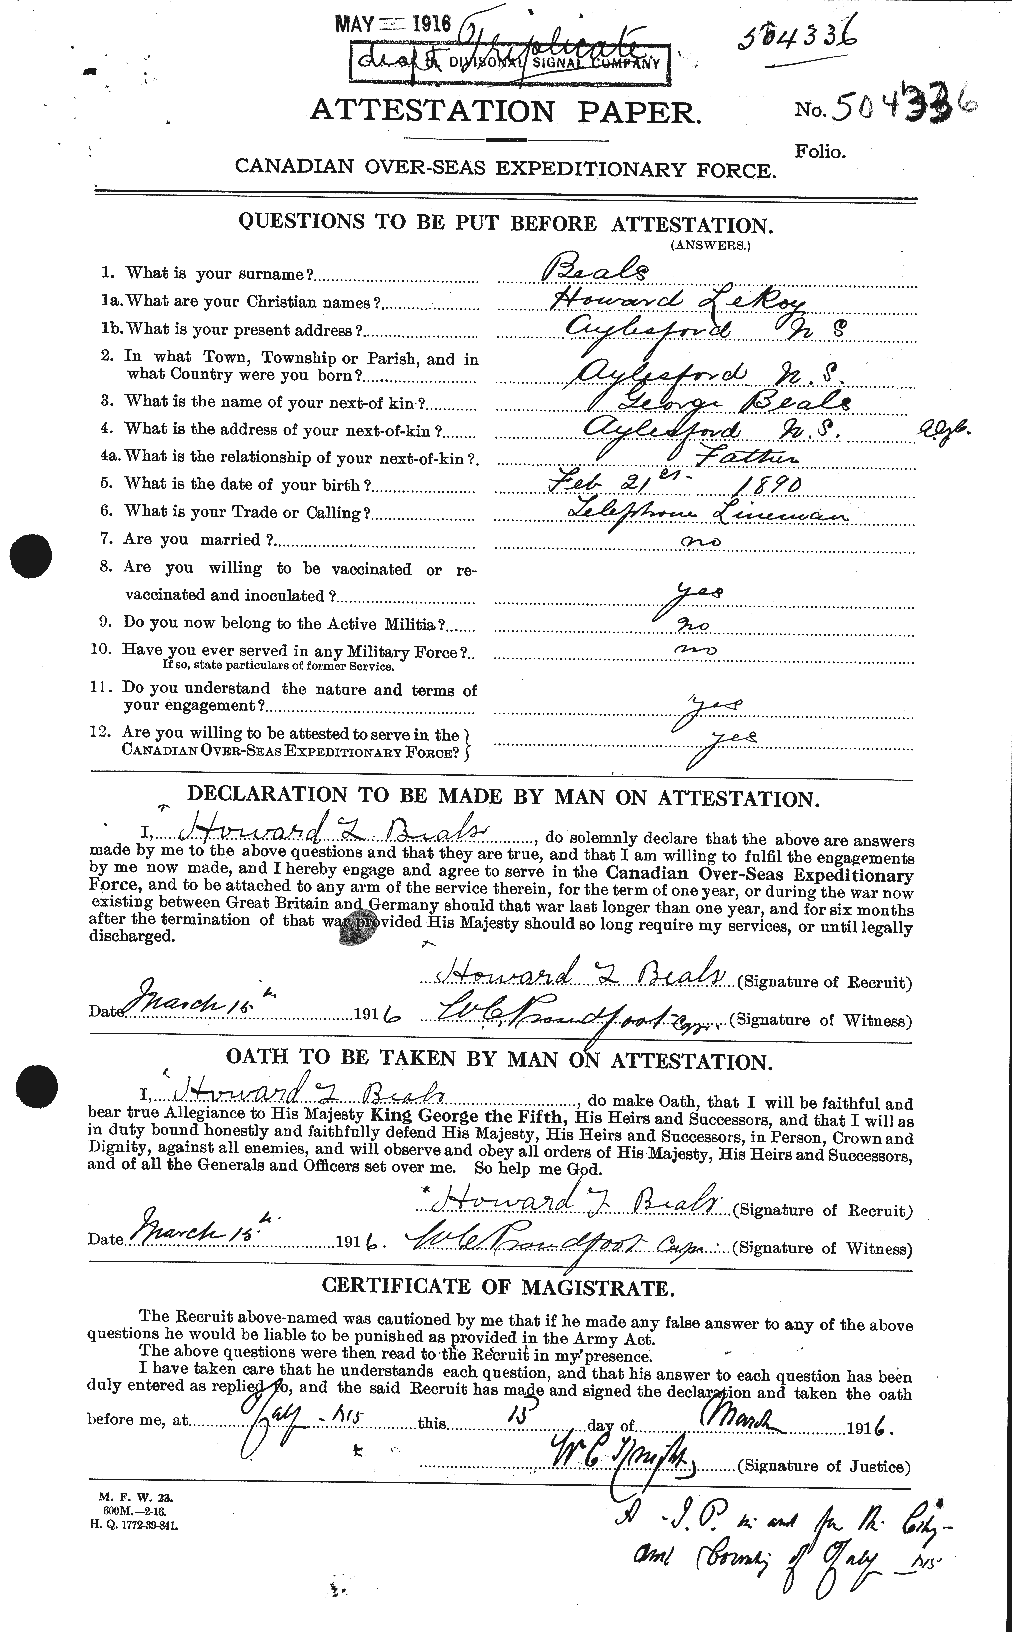 Personnel Records of the First World War - CEF 235392a